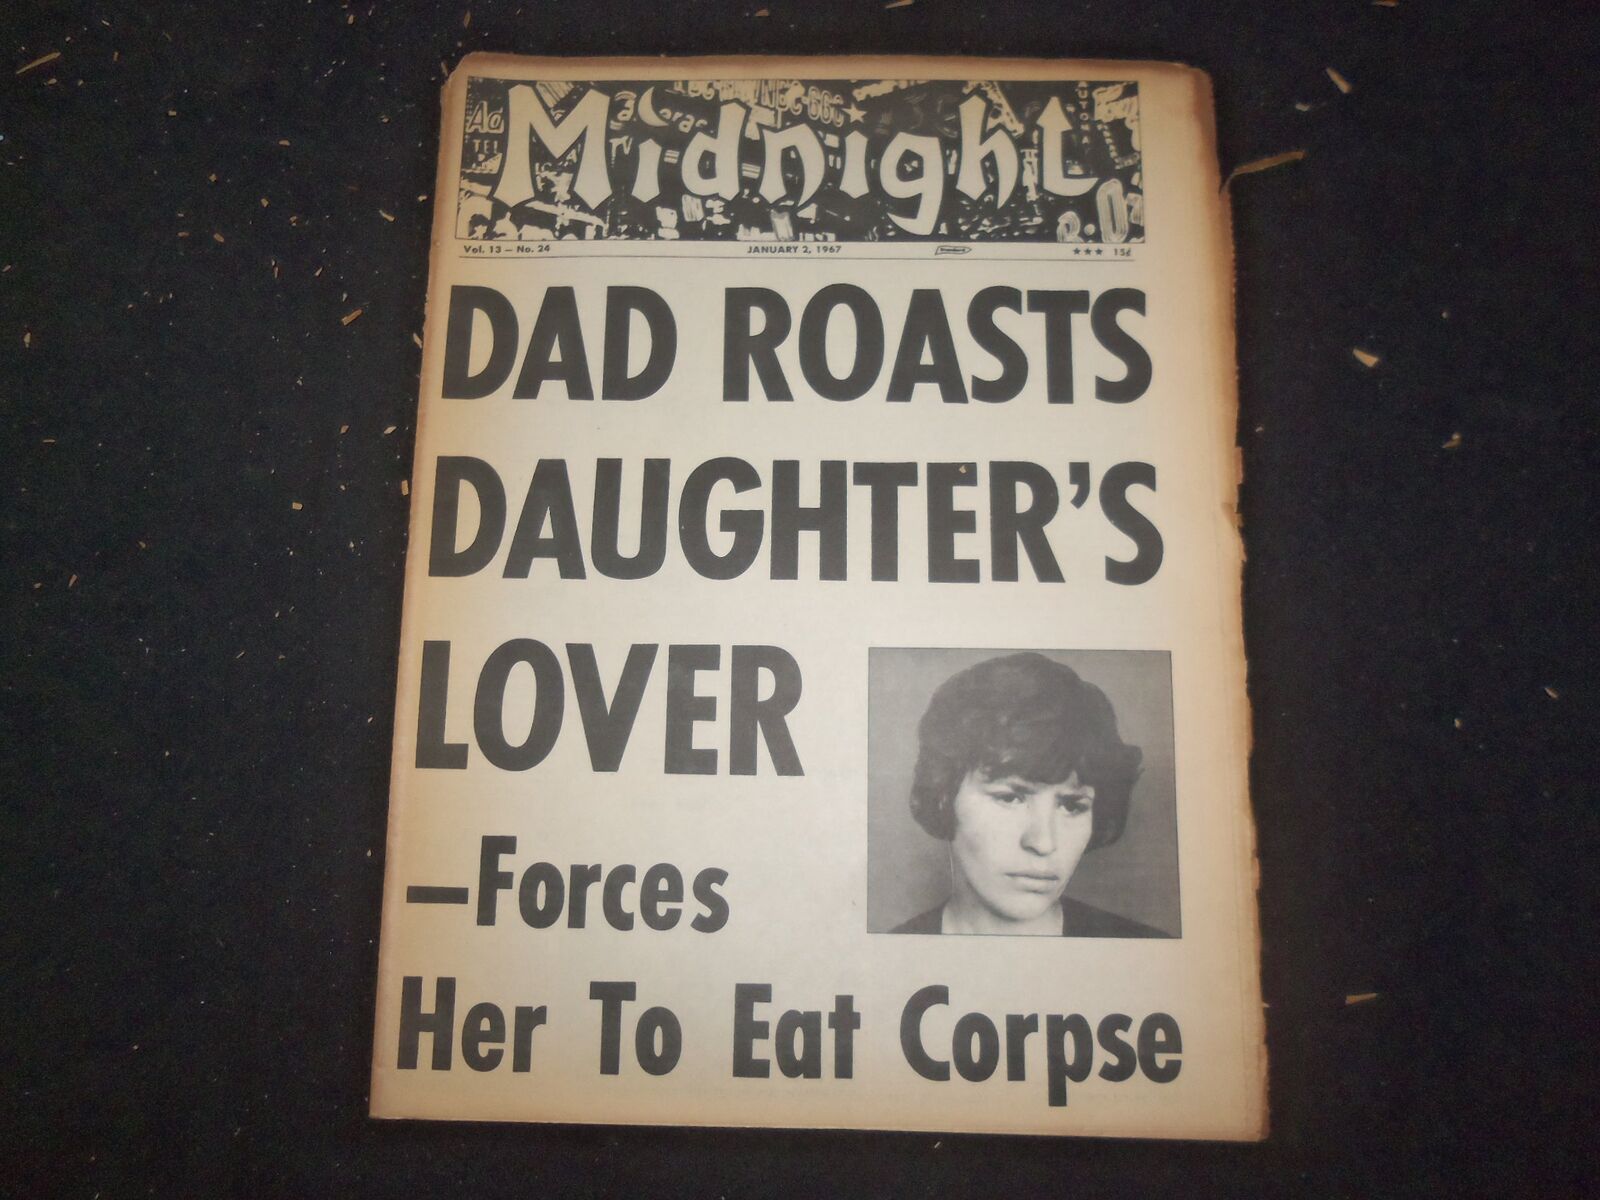 1967 JANUARY 2 MIDNIGHT NEWSPAPER - DAD ROASTS DAUGHTER'S LOVER - NP 7373